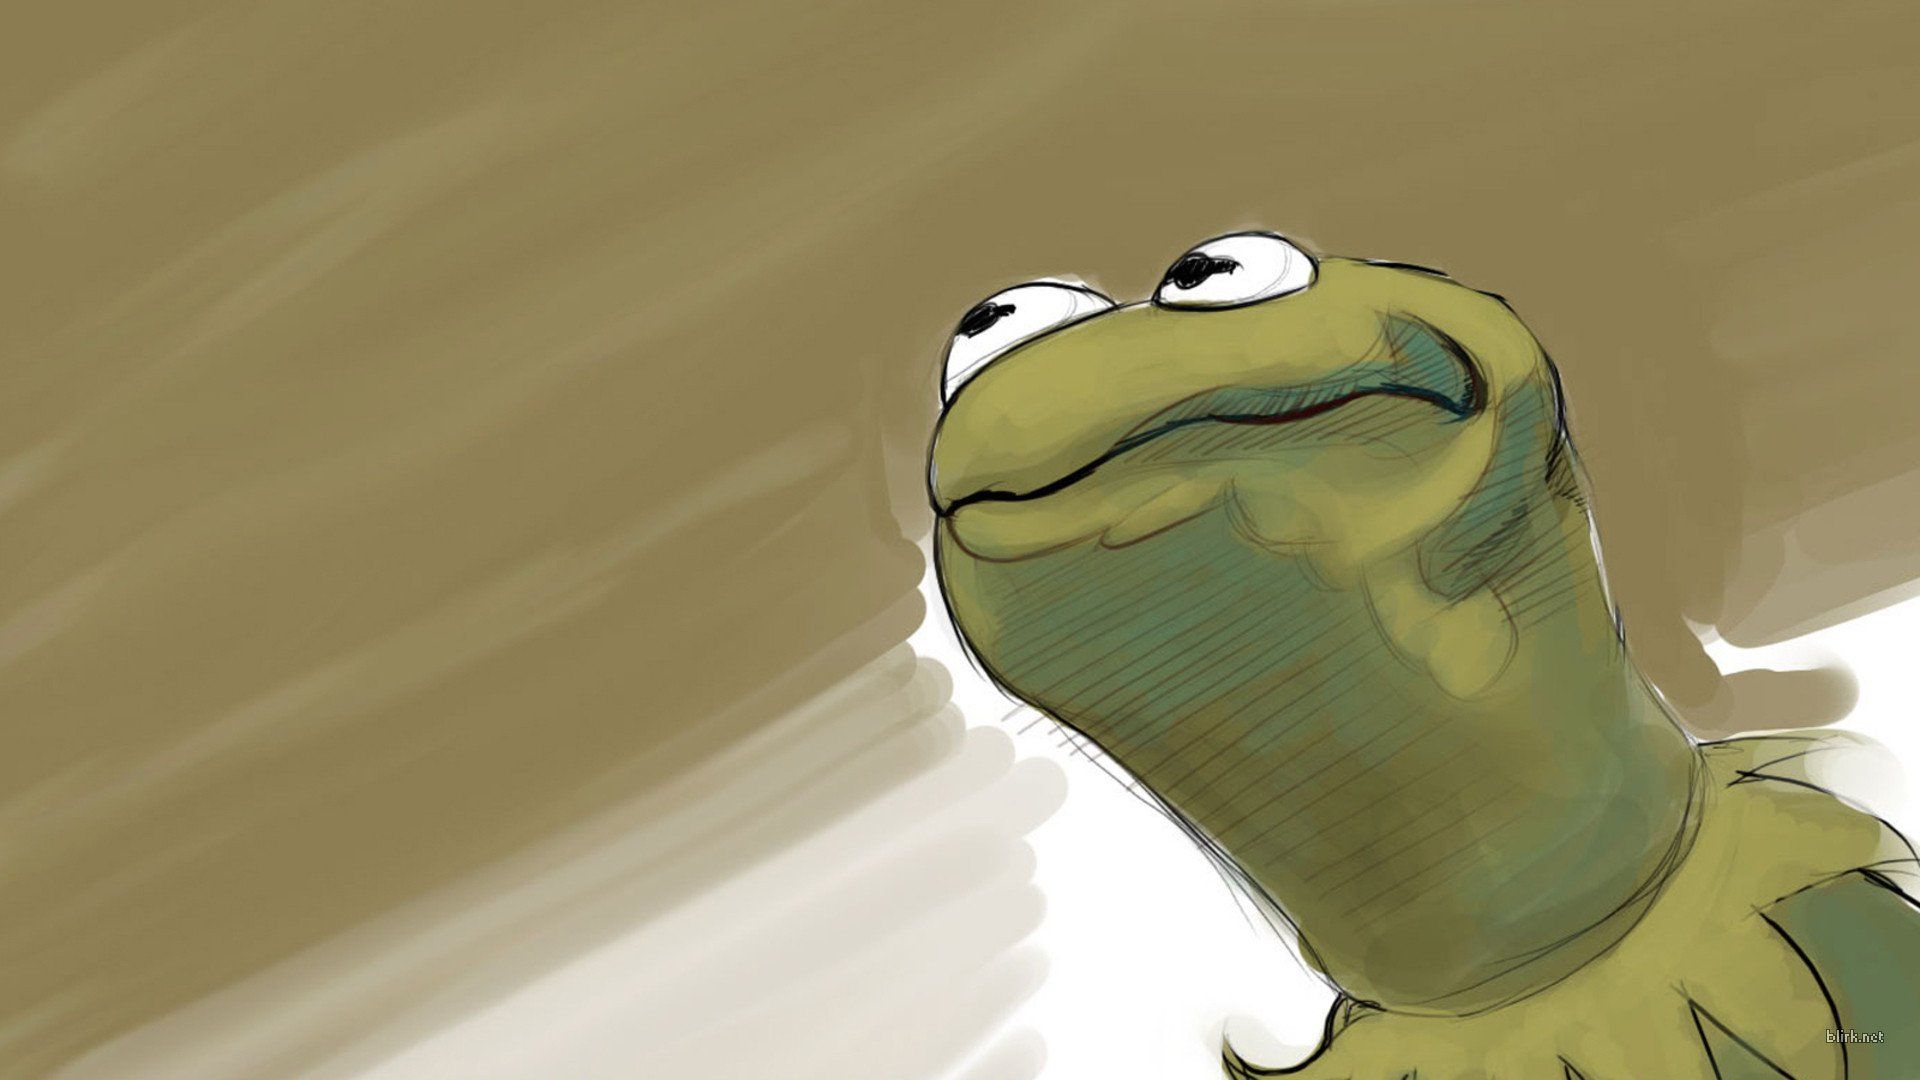 A drawing of kermit the frog - Frog, Kermit the Frog